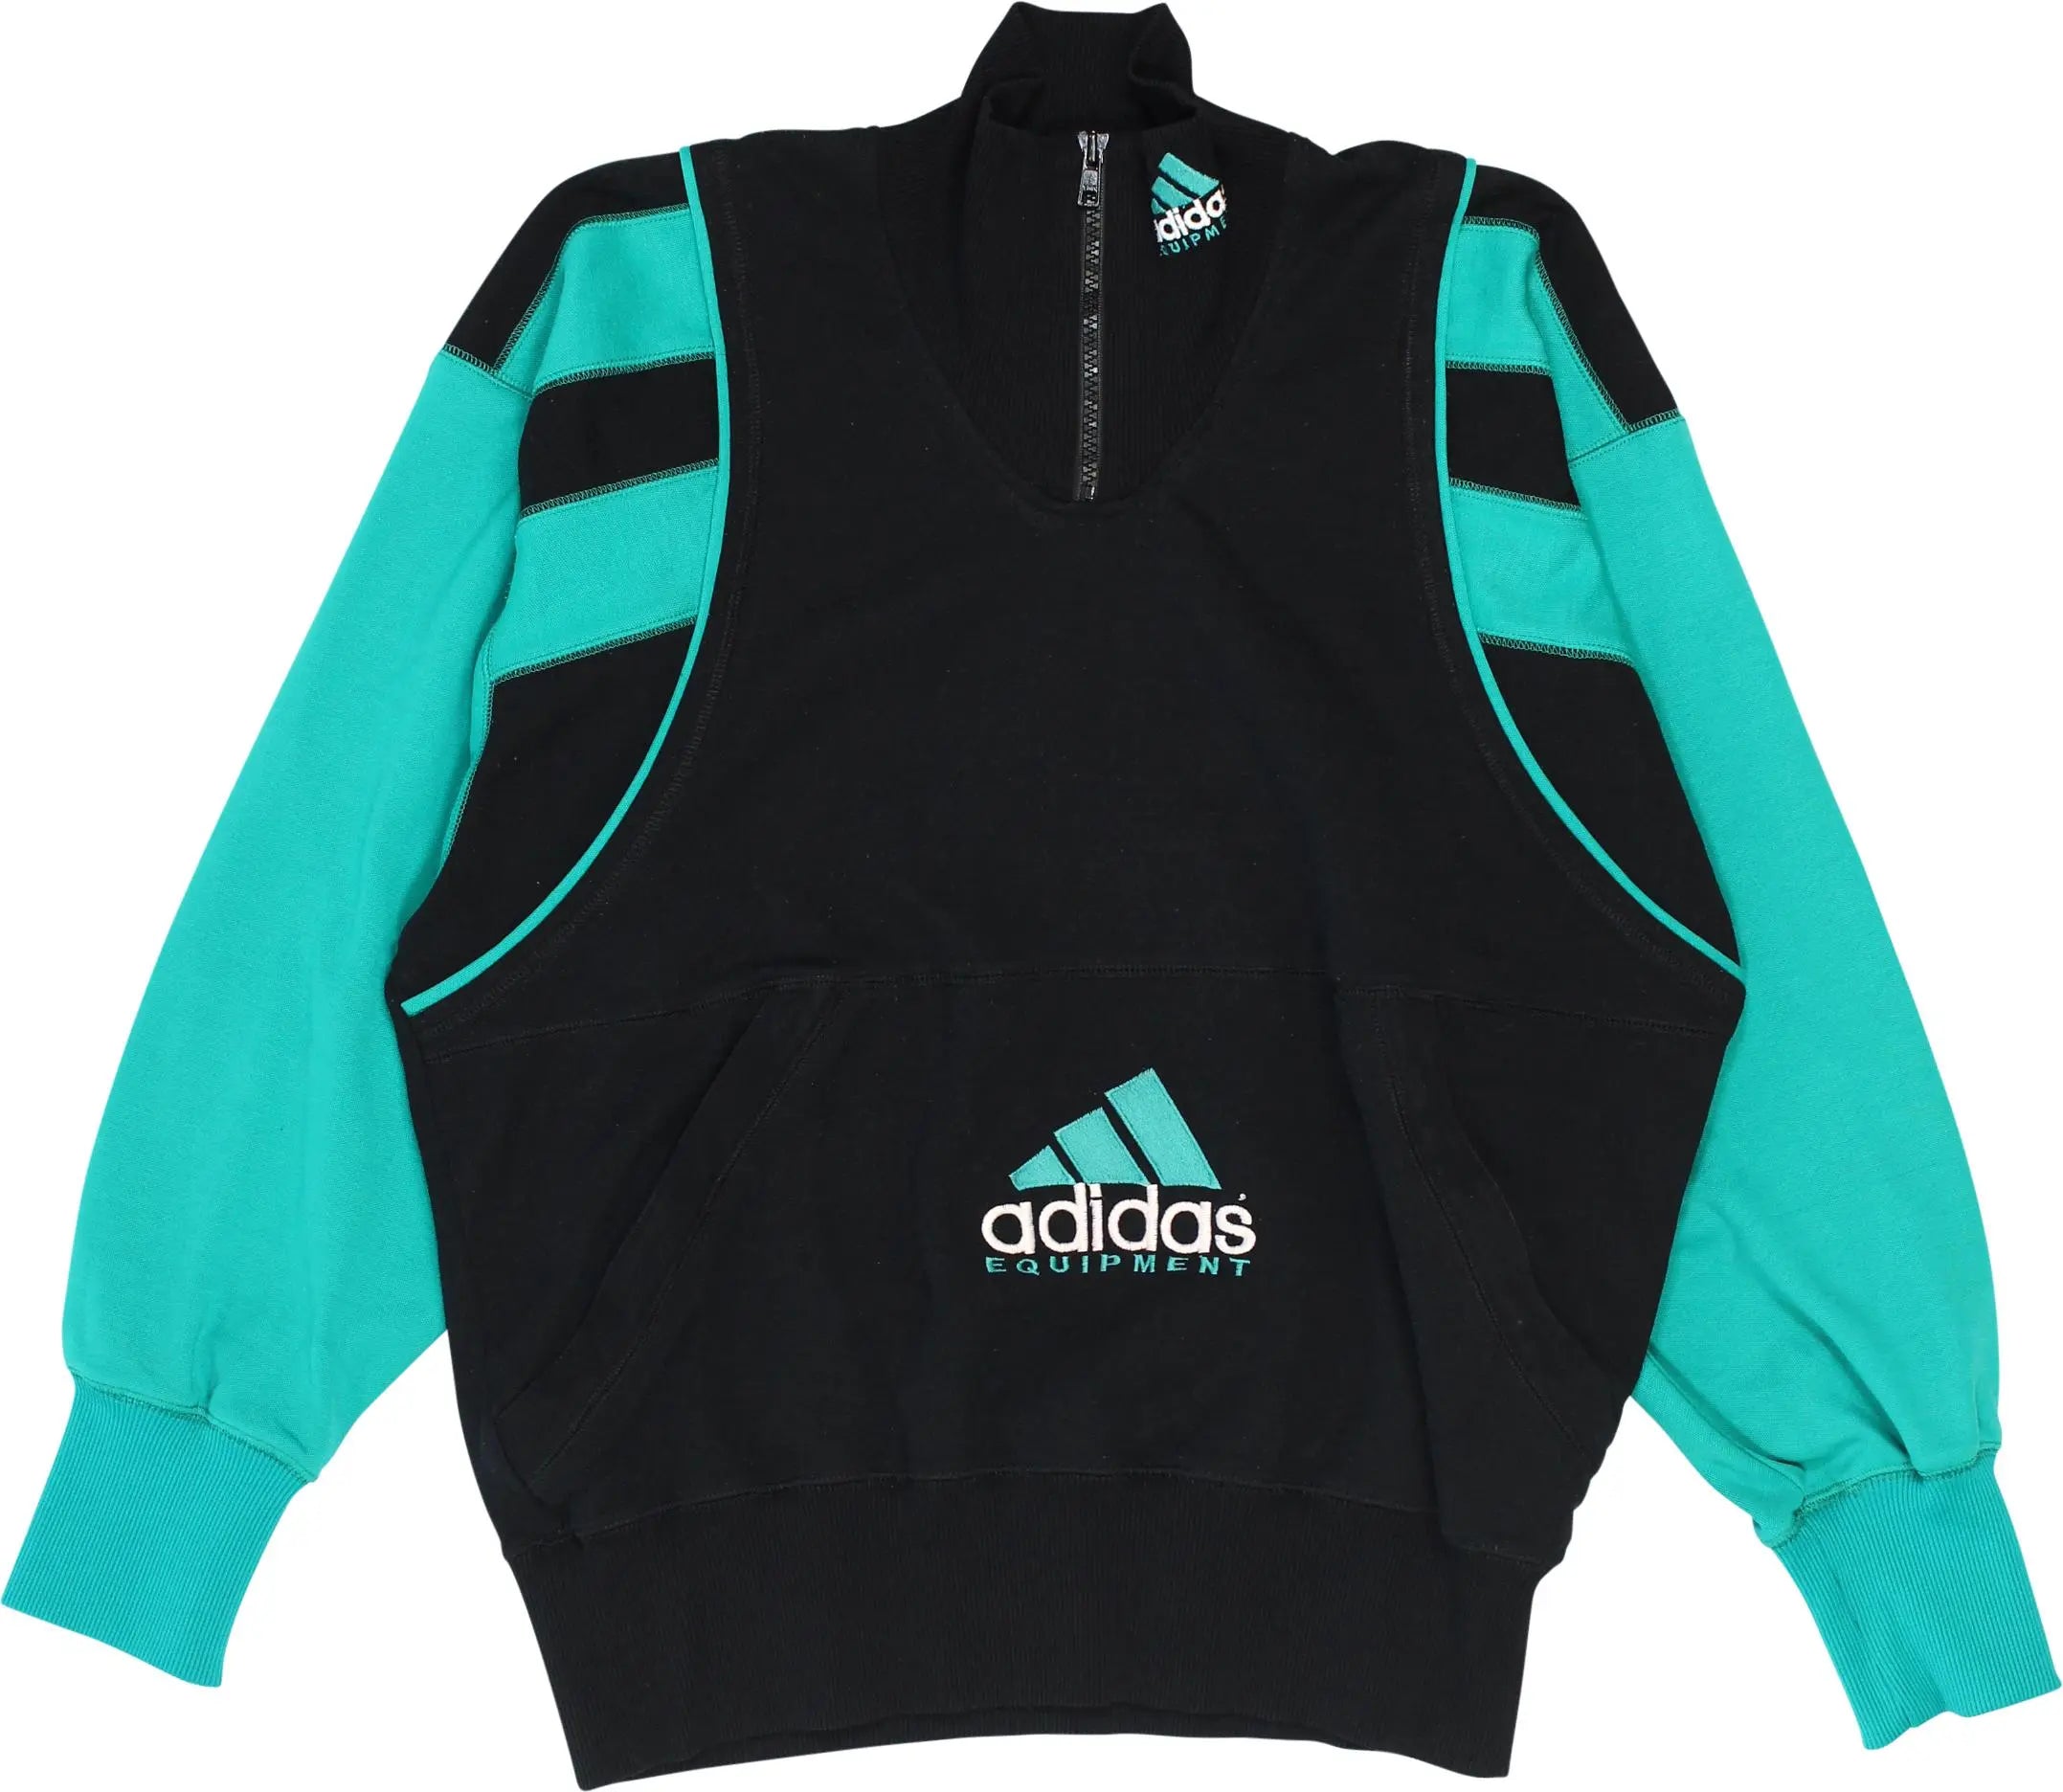 Adidas - 90s Adidas Equipment Quarter Zip Sweater- ThriftTale.com - Vintage and second handclothing